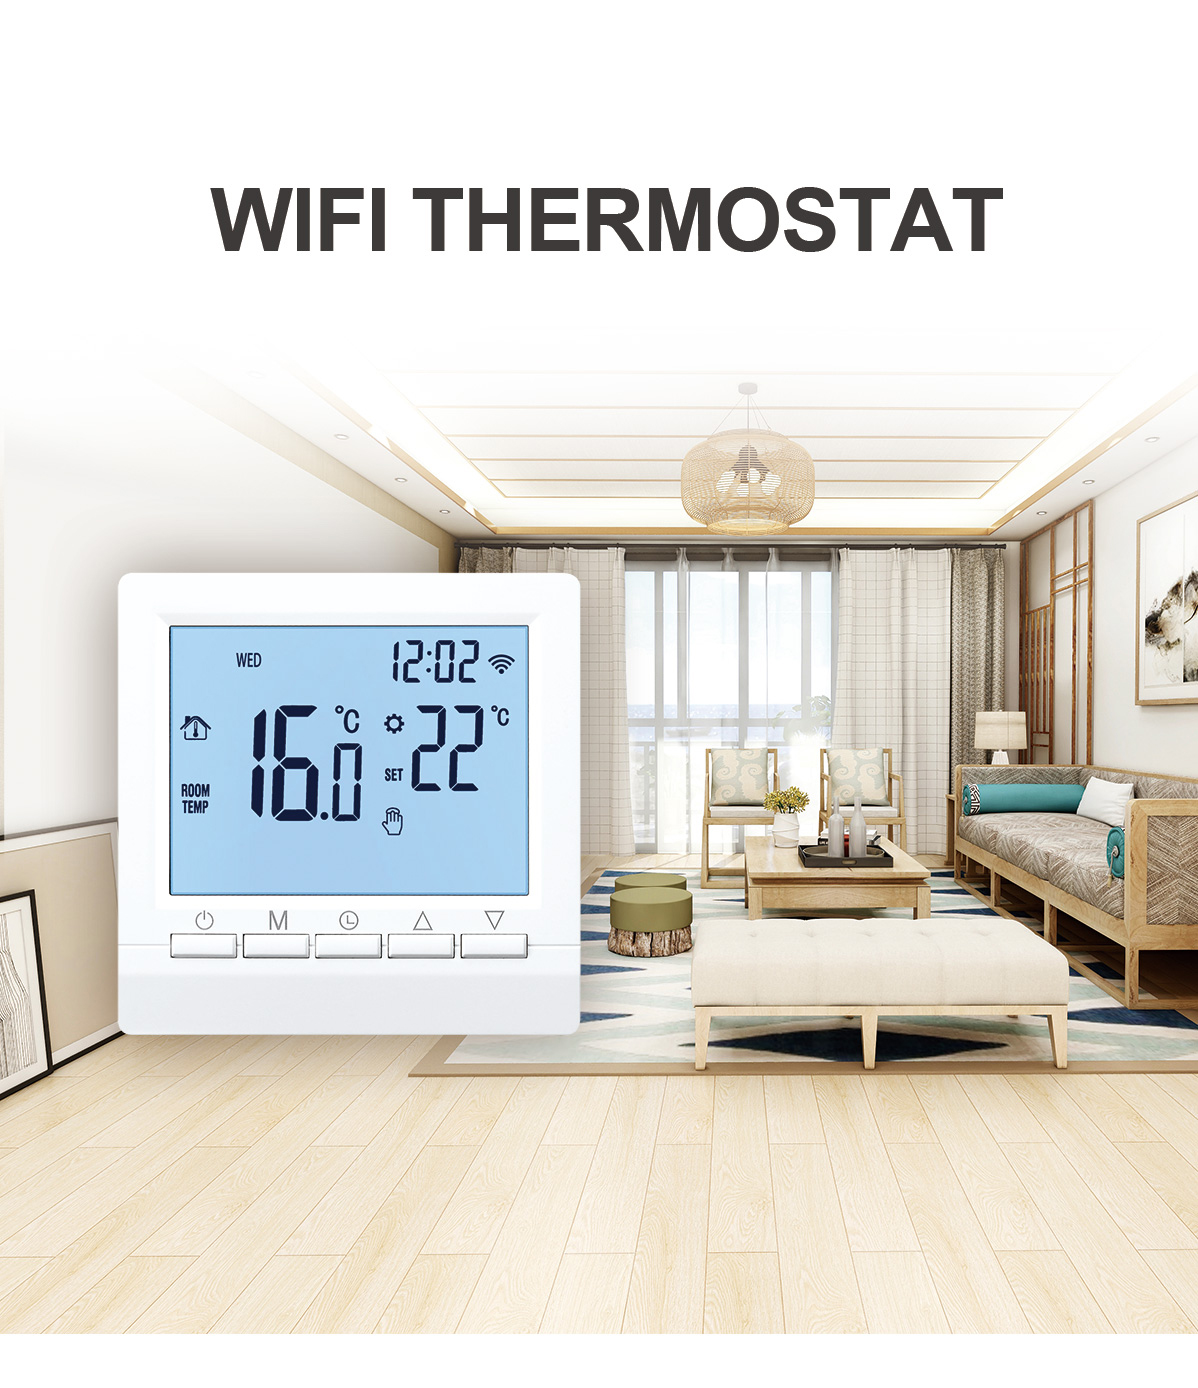 Myuet ME83 Wifi Smart Heating Thermostat LCD Display Memory Function Floor Heating System Electric/Water Temperature Controller